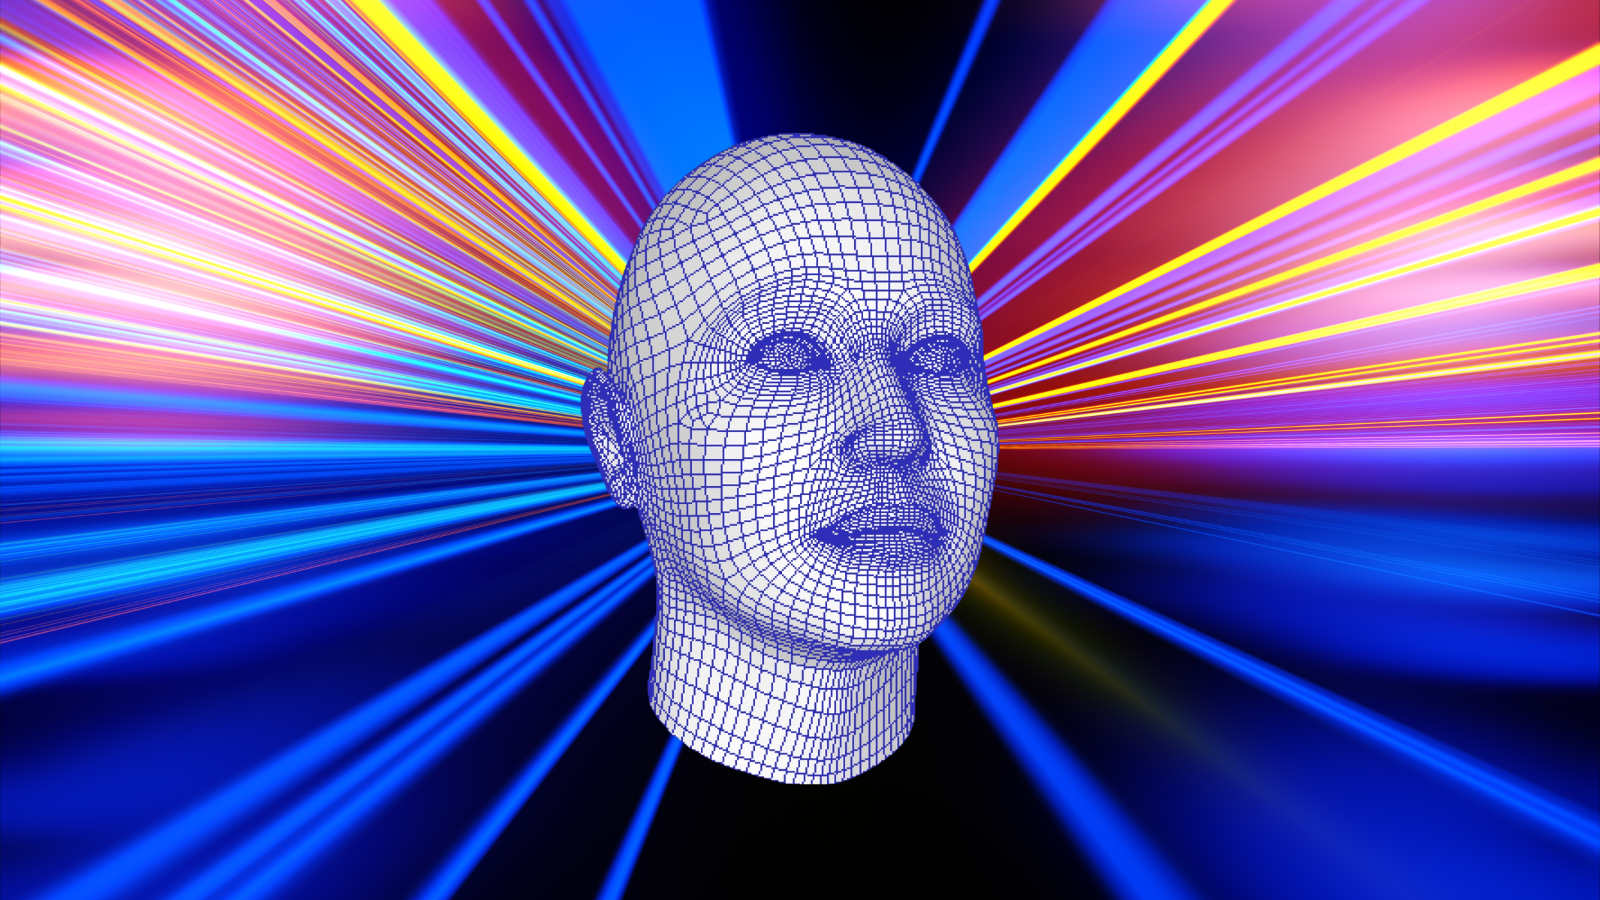 Digital wireframe human head with a dynamic, colorful background in blue and purple shades, evoking a tech vibe